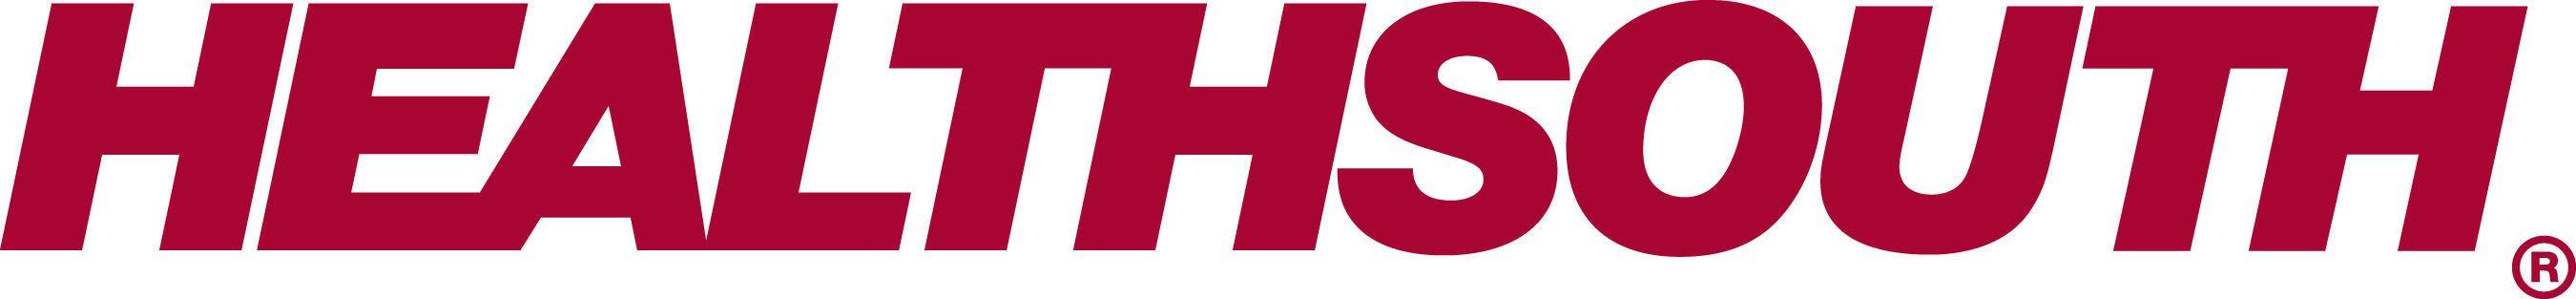 HealthSouth Logo - HealthSouth Corporation And University Medical Center Health System